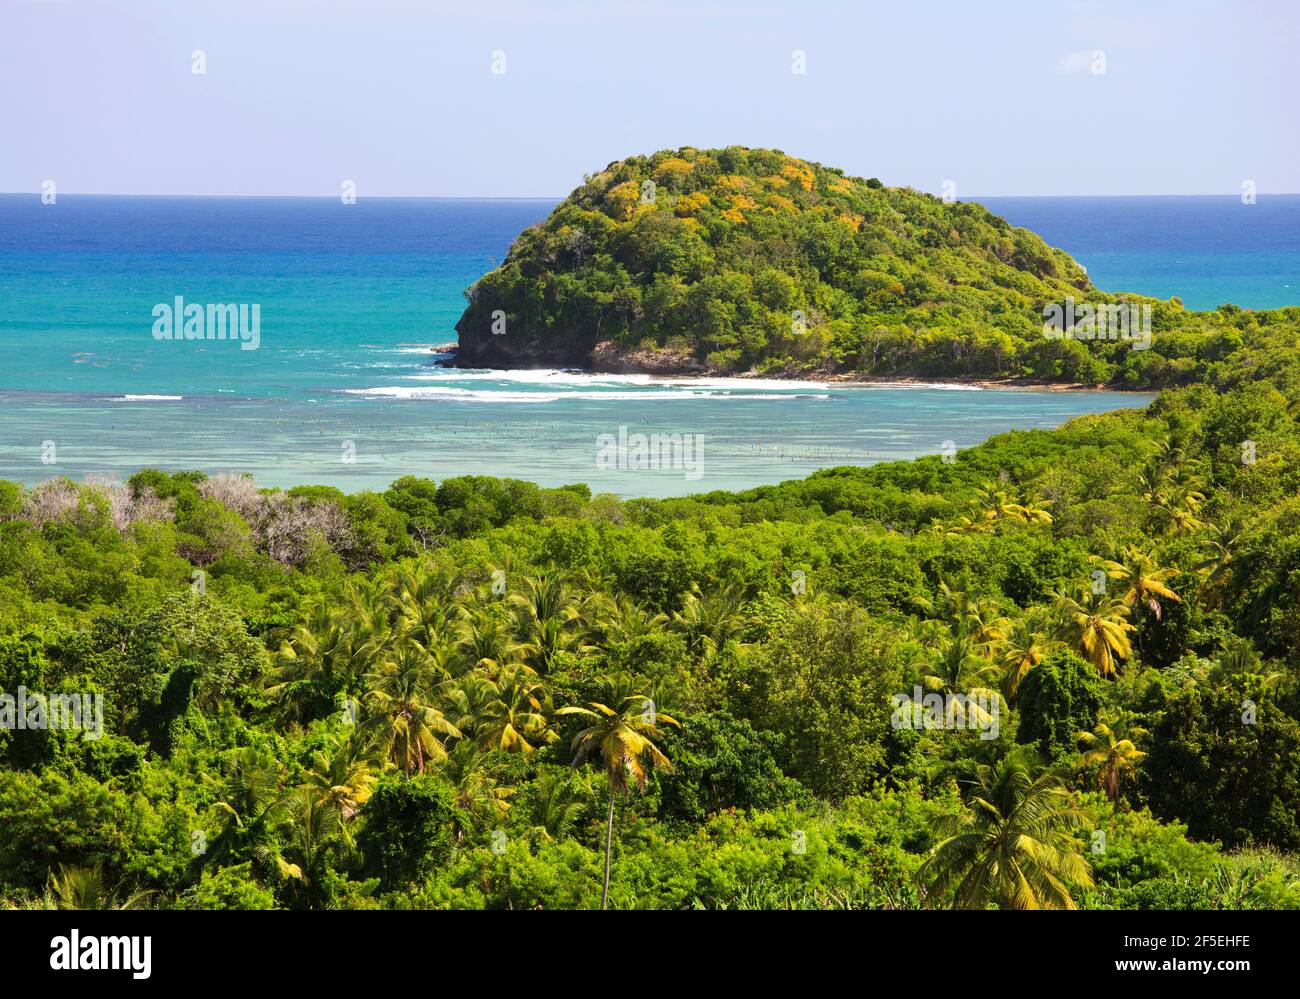 Mon Repos, Micoud, St Lucia. View over the stunning turquoise waters of the Atlantic Ocean from hillside viewpoint above Praslin Bay. Stock Photo